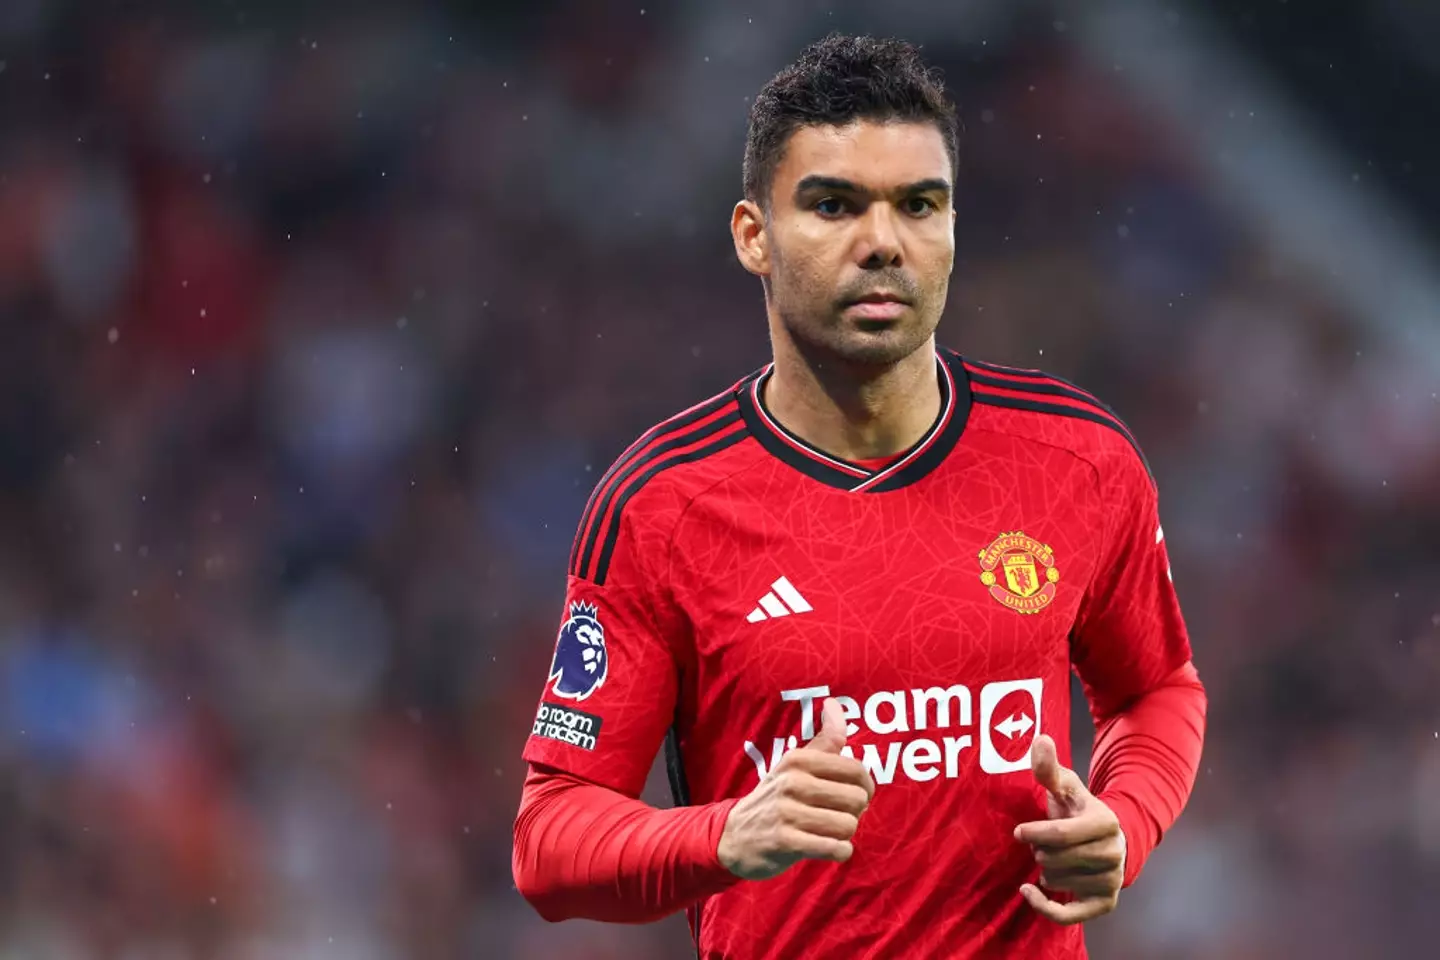 Casemiro has been linked with a move away from United (Image: Getty)